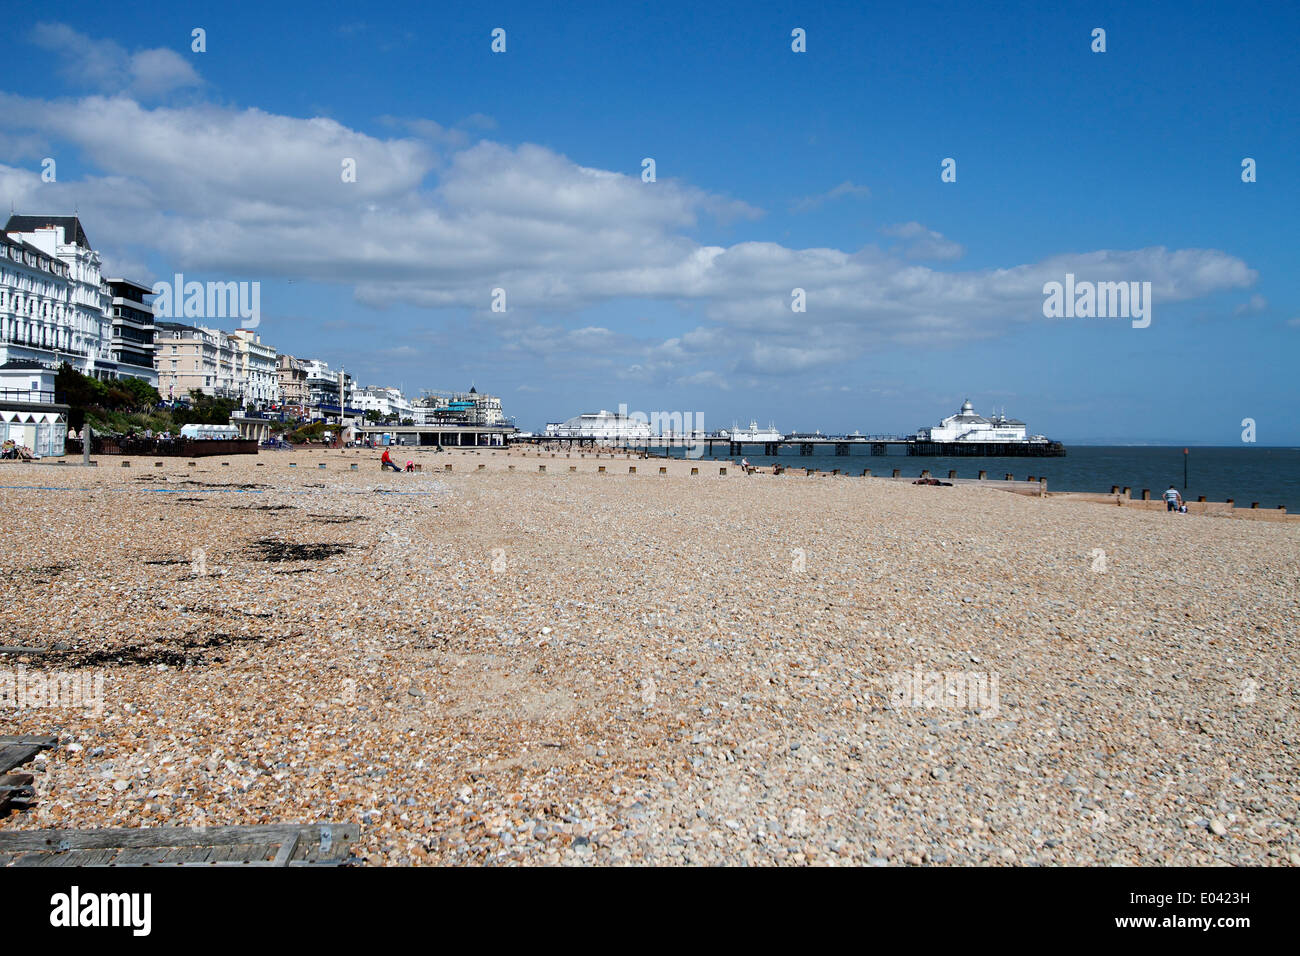 The Sea front at Eastbourne looking towards the Pier Stock Photo